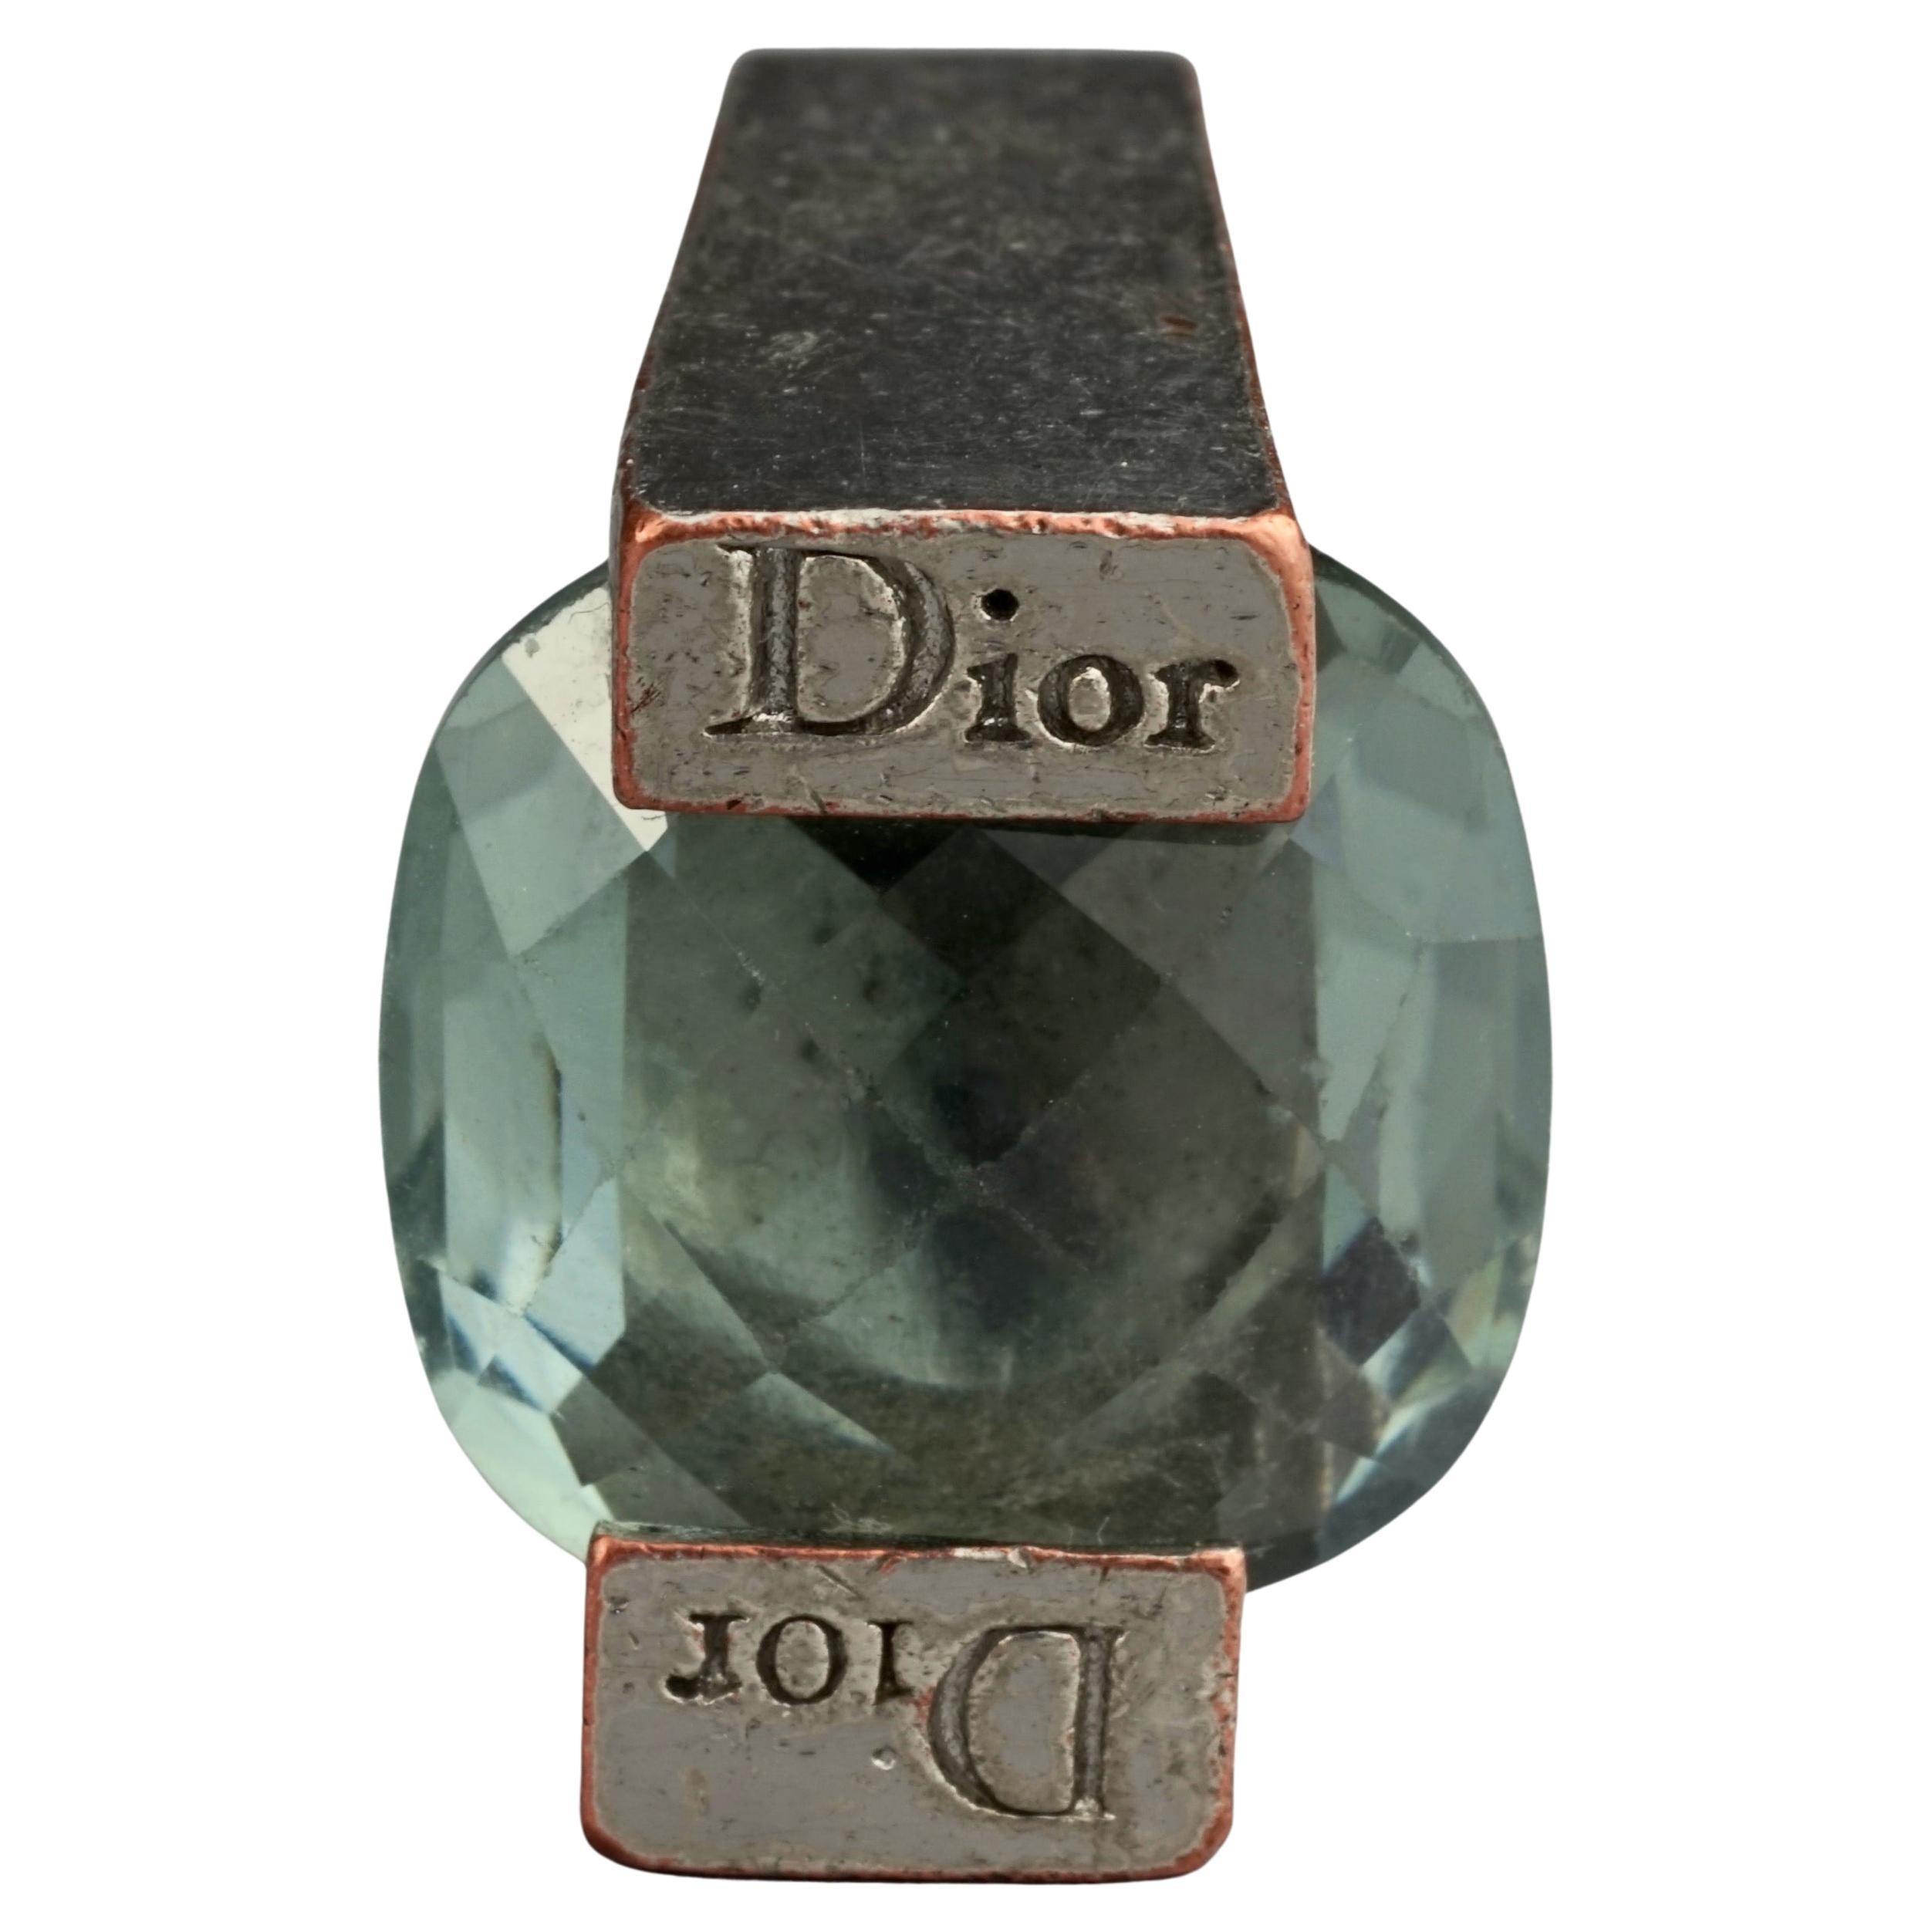 Vintage CHRISTIAN DIOR Aquamarine Art Deco Ring

Measurements:
SIZE: 52
Face Height: 0.63 inch (1.6 cm)
Face Width: 0.78 inch (2 cm)

Features:
- 100% Authentic CHRISTIAN DIOR.
- Arte deco ring with faceted aquamarine glass stone.
- Engraved DIOR on